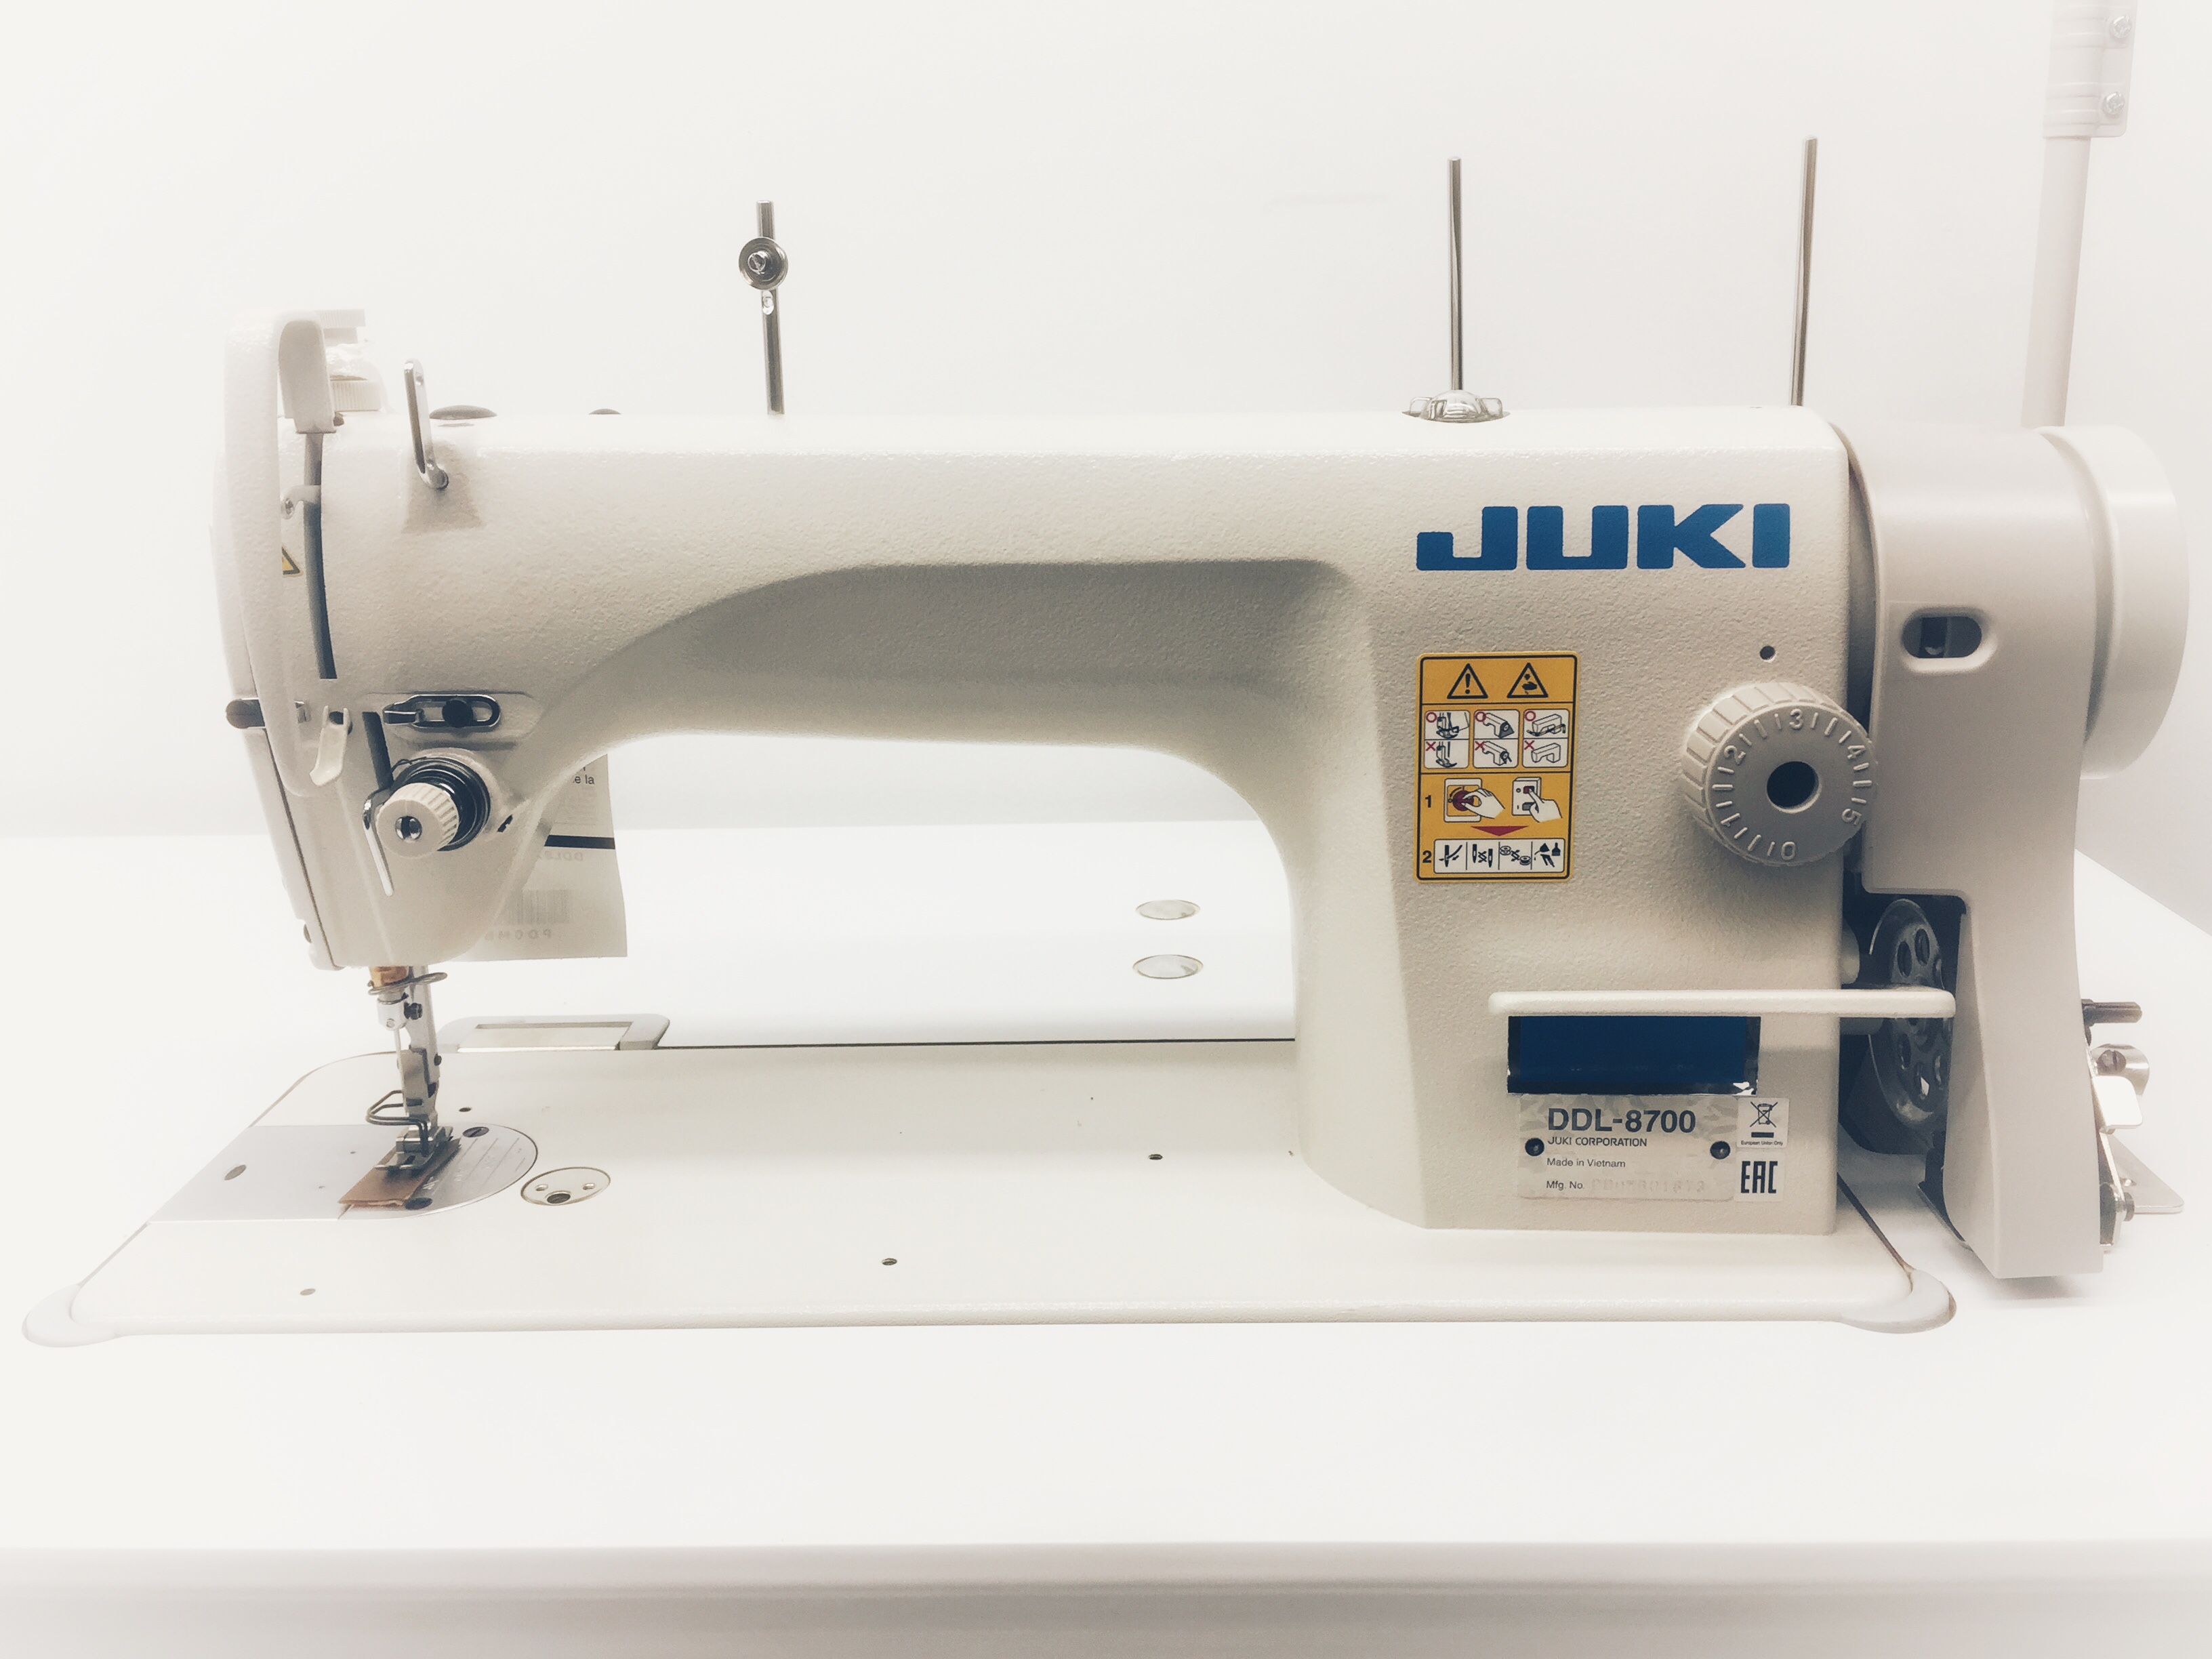 Juki DDL-8700 Single Needle Straight Stitch Complete with White table top stannd and 110 Volt Servo Motor